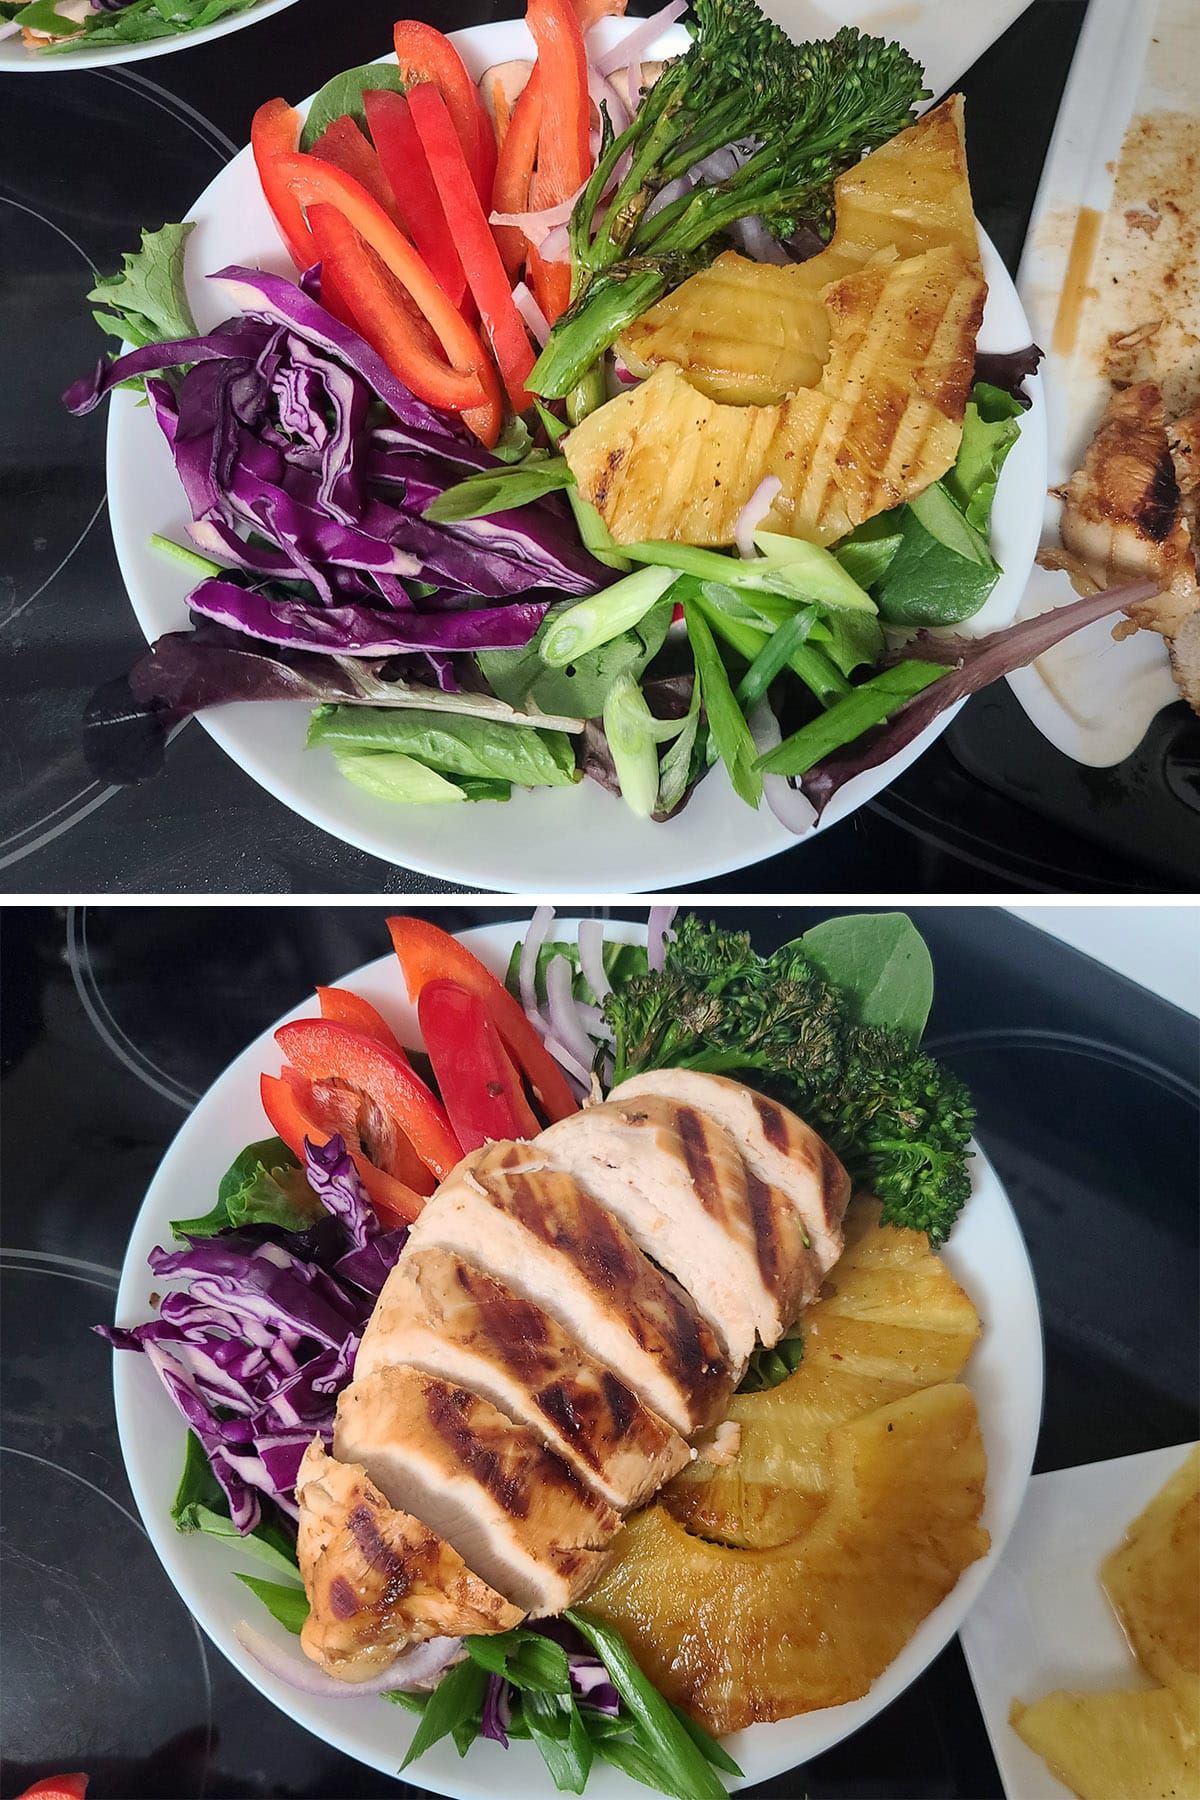 A 2 part image showing the assembled base salad before and after being topped with grilled chicken teriyaki.